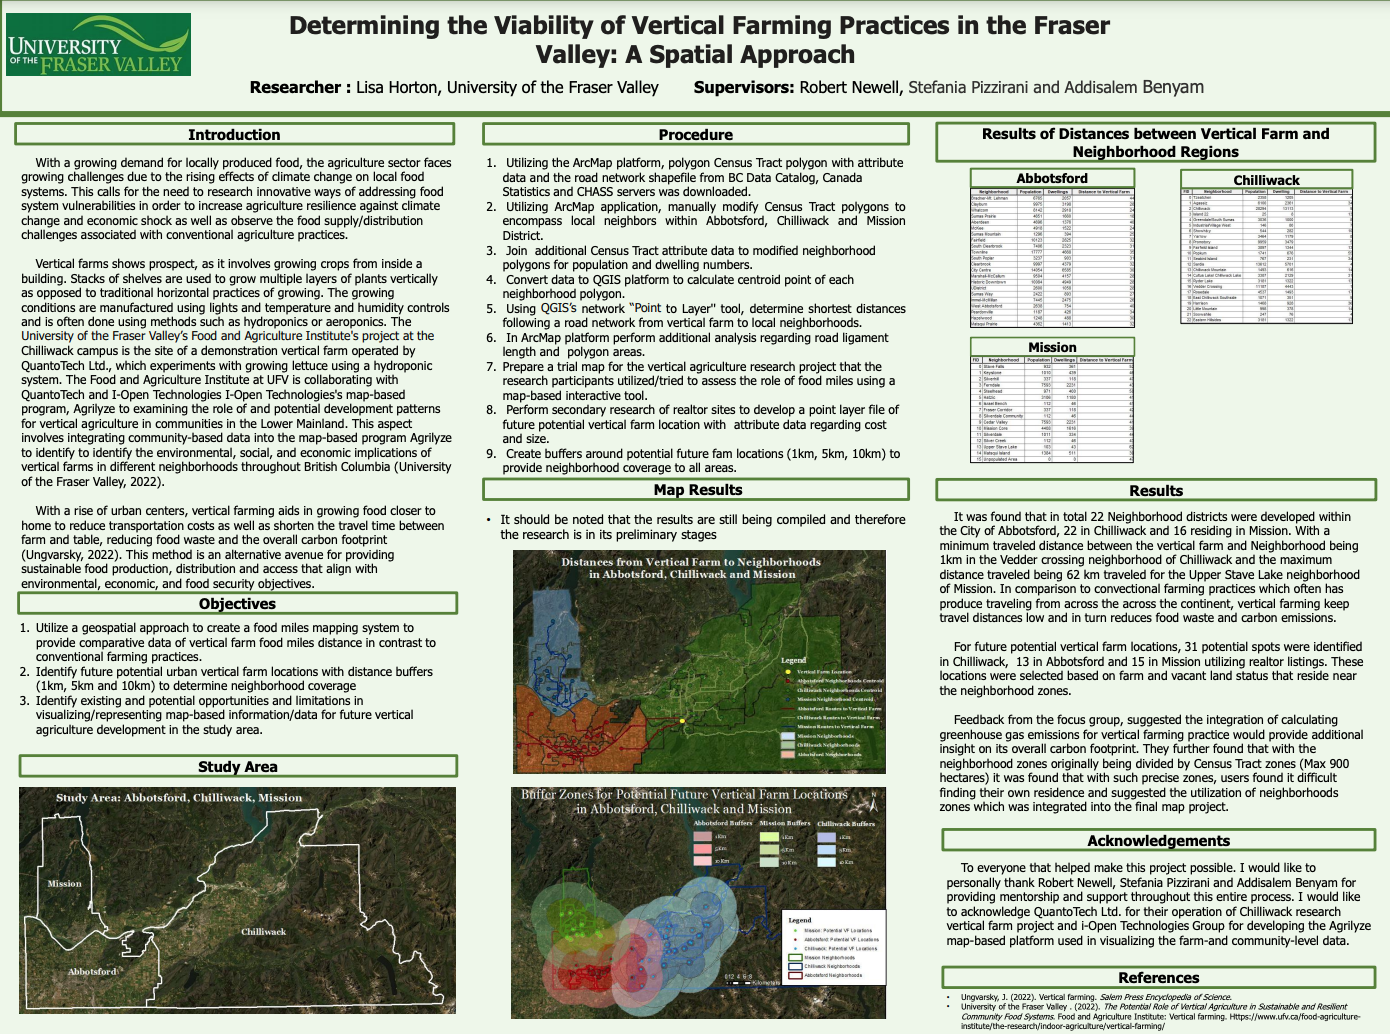 Determining the viability of vertical farming practices in the Fraser Valley: A spatial approach poster